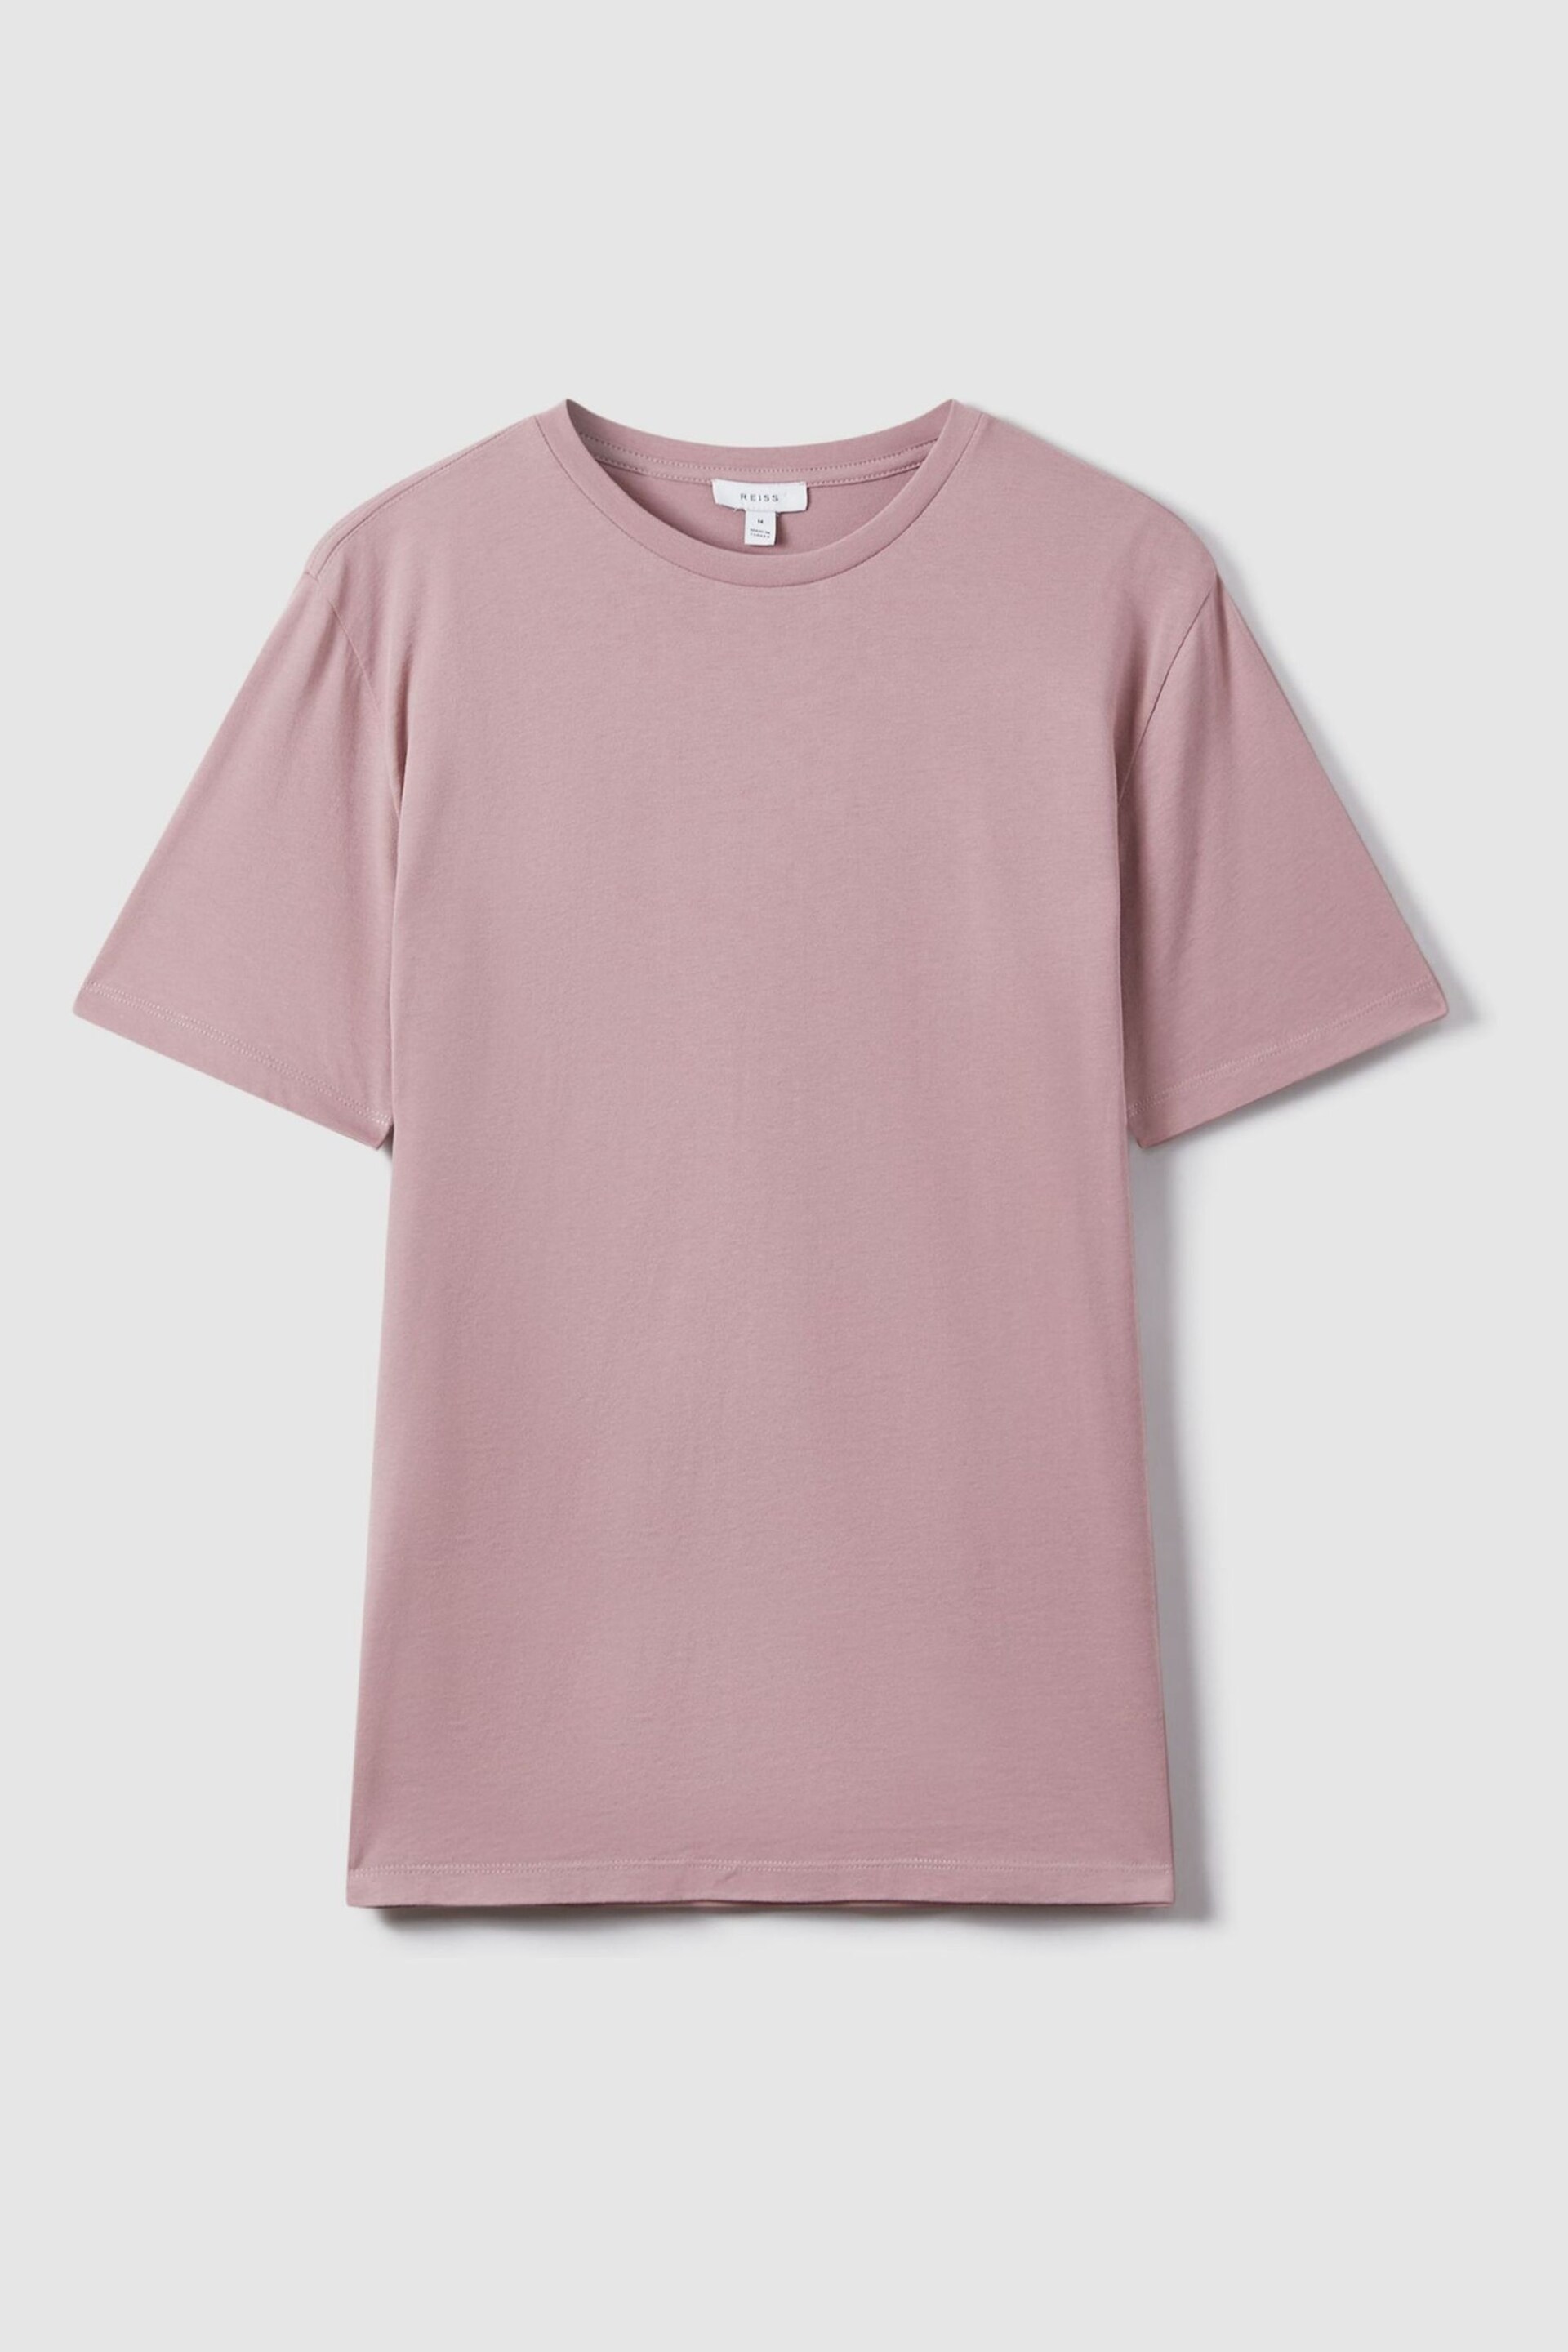 Reiss Dusty Rose Bless Cotton Crew Neck T-Shirt - Image 2 of 6